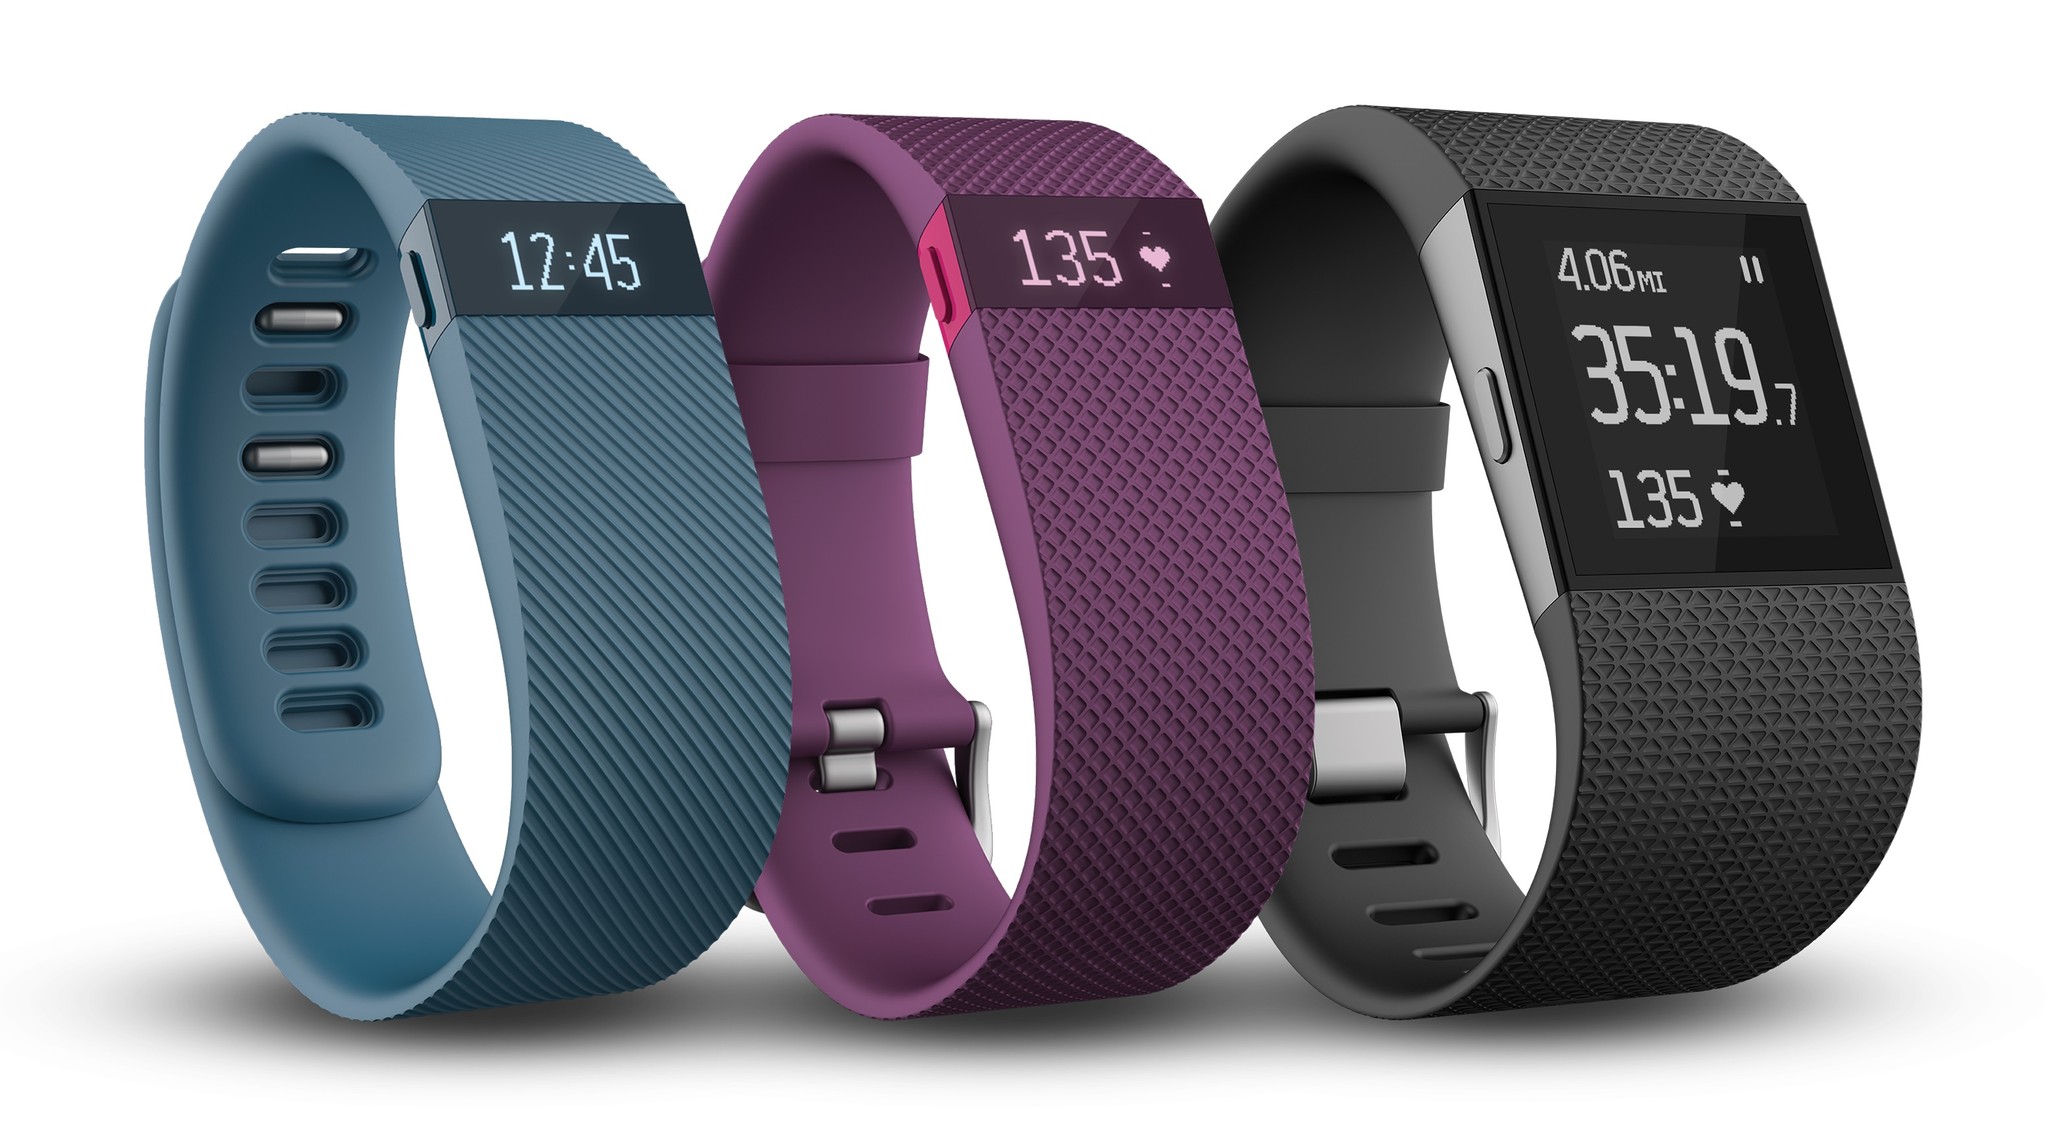 How to restart your Fitbit tracker